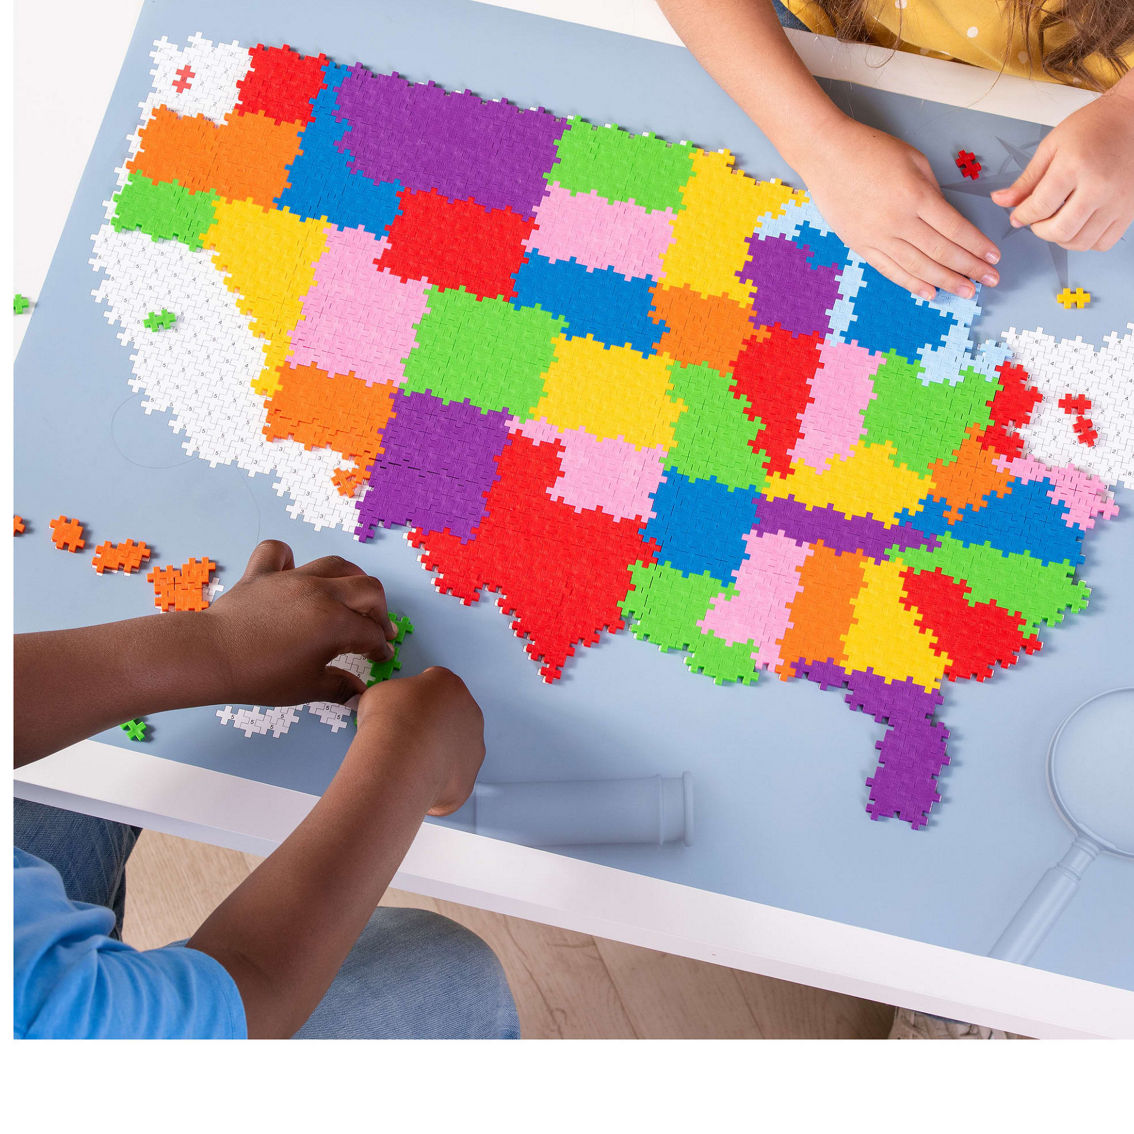 Plus-Plus Puzzle By Number - Map of the United States: 1400 Pcs - Image 5 of 5